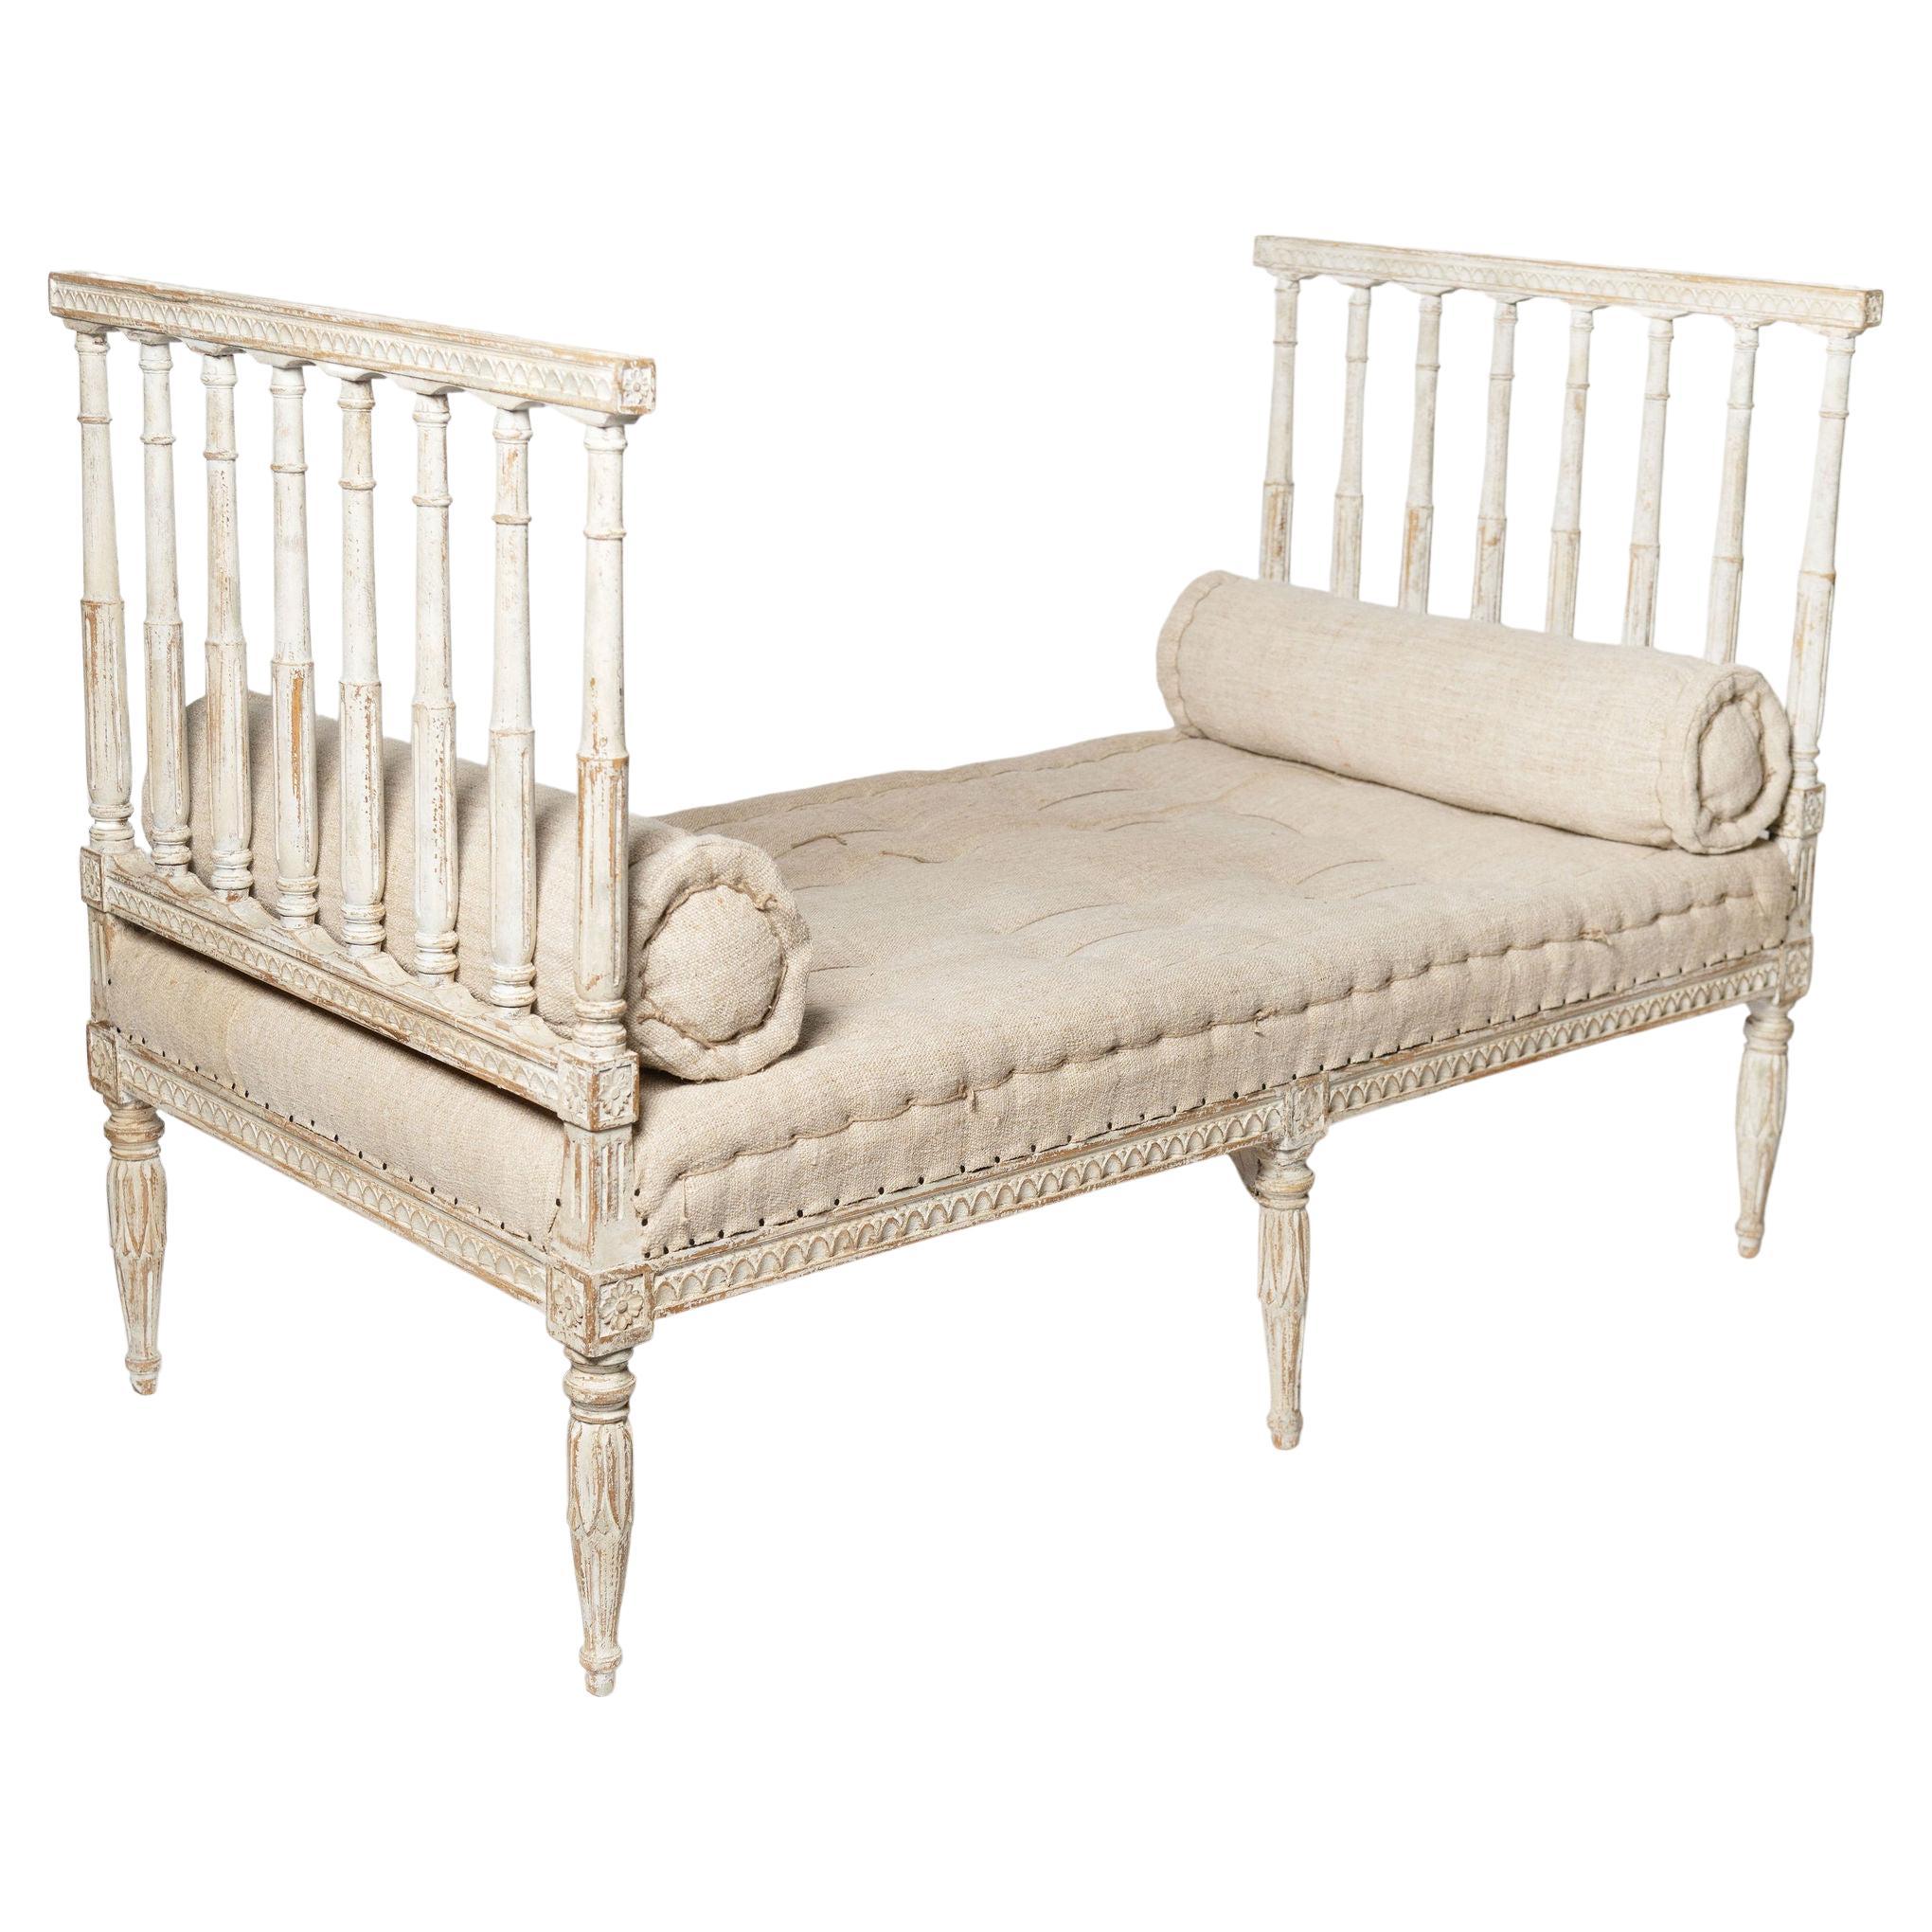 Antique Swedish daybed, sofa, stool, c1800, gustavian, Swedish upholstery   For Sale